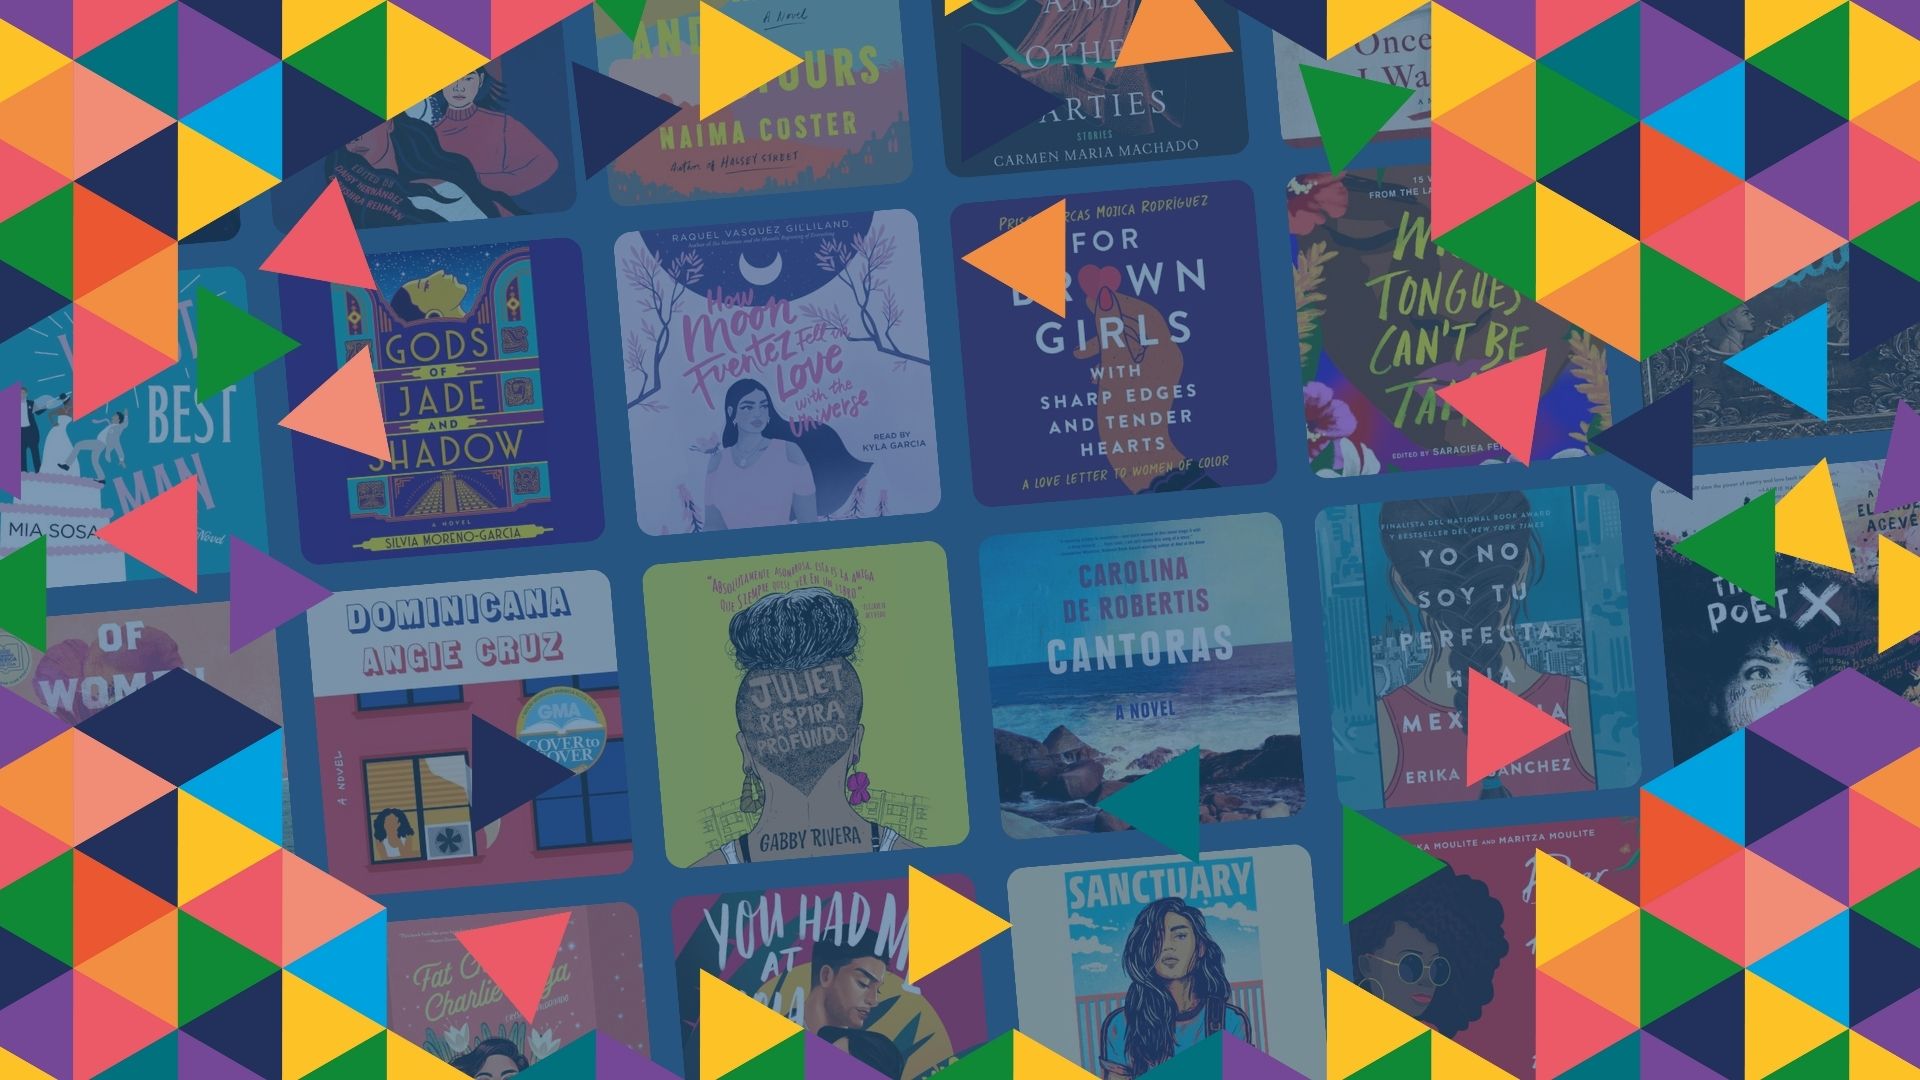 A collage of several of the book covers of the books featured in the quiz, overlaid with colorful confetti